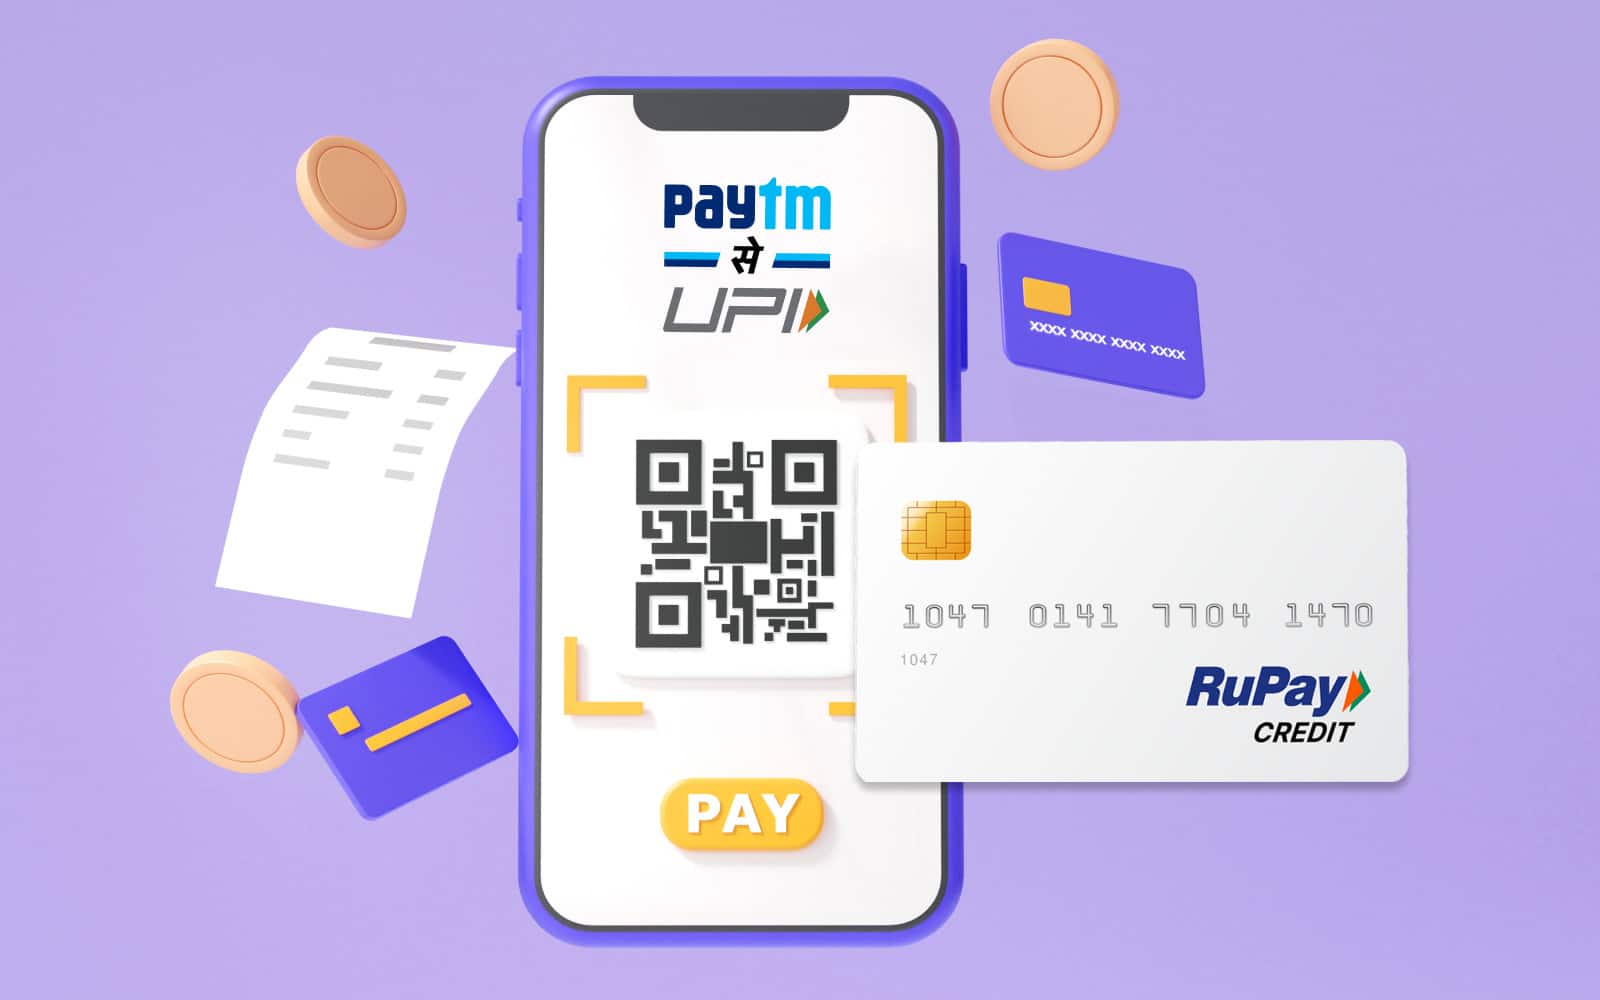 Paytm Fortifies Its UPI Dominance With Payments Through Rupay Credit Card